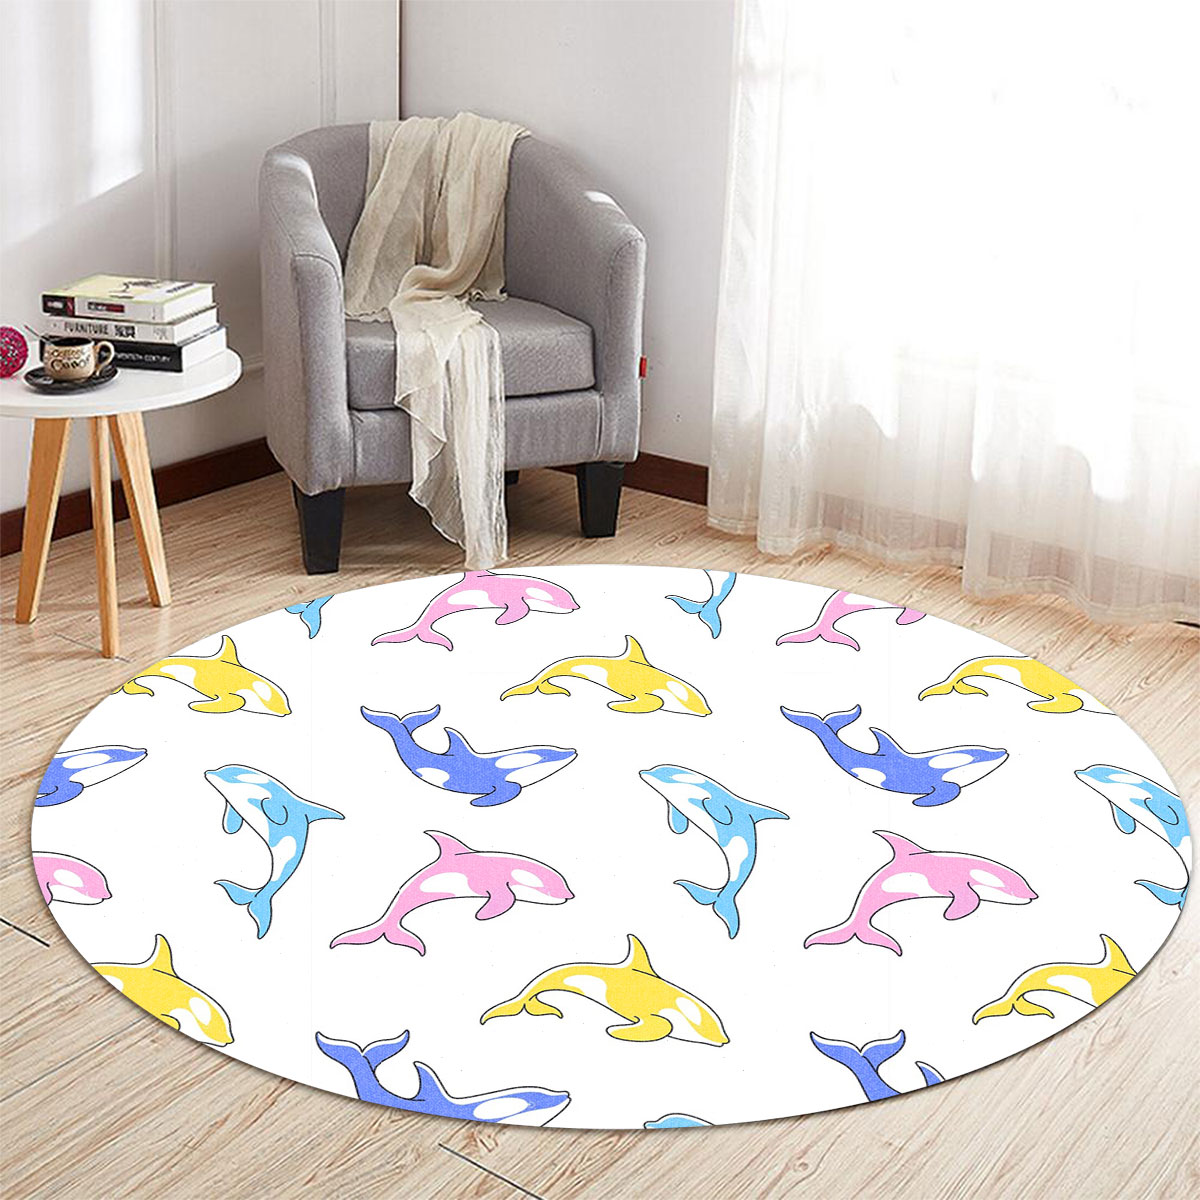 Colorful Orca Whale Round Carpet